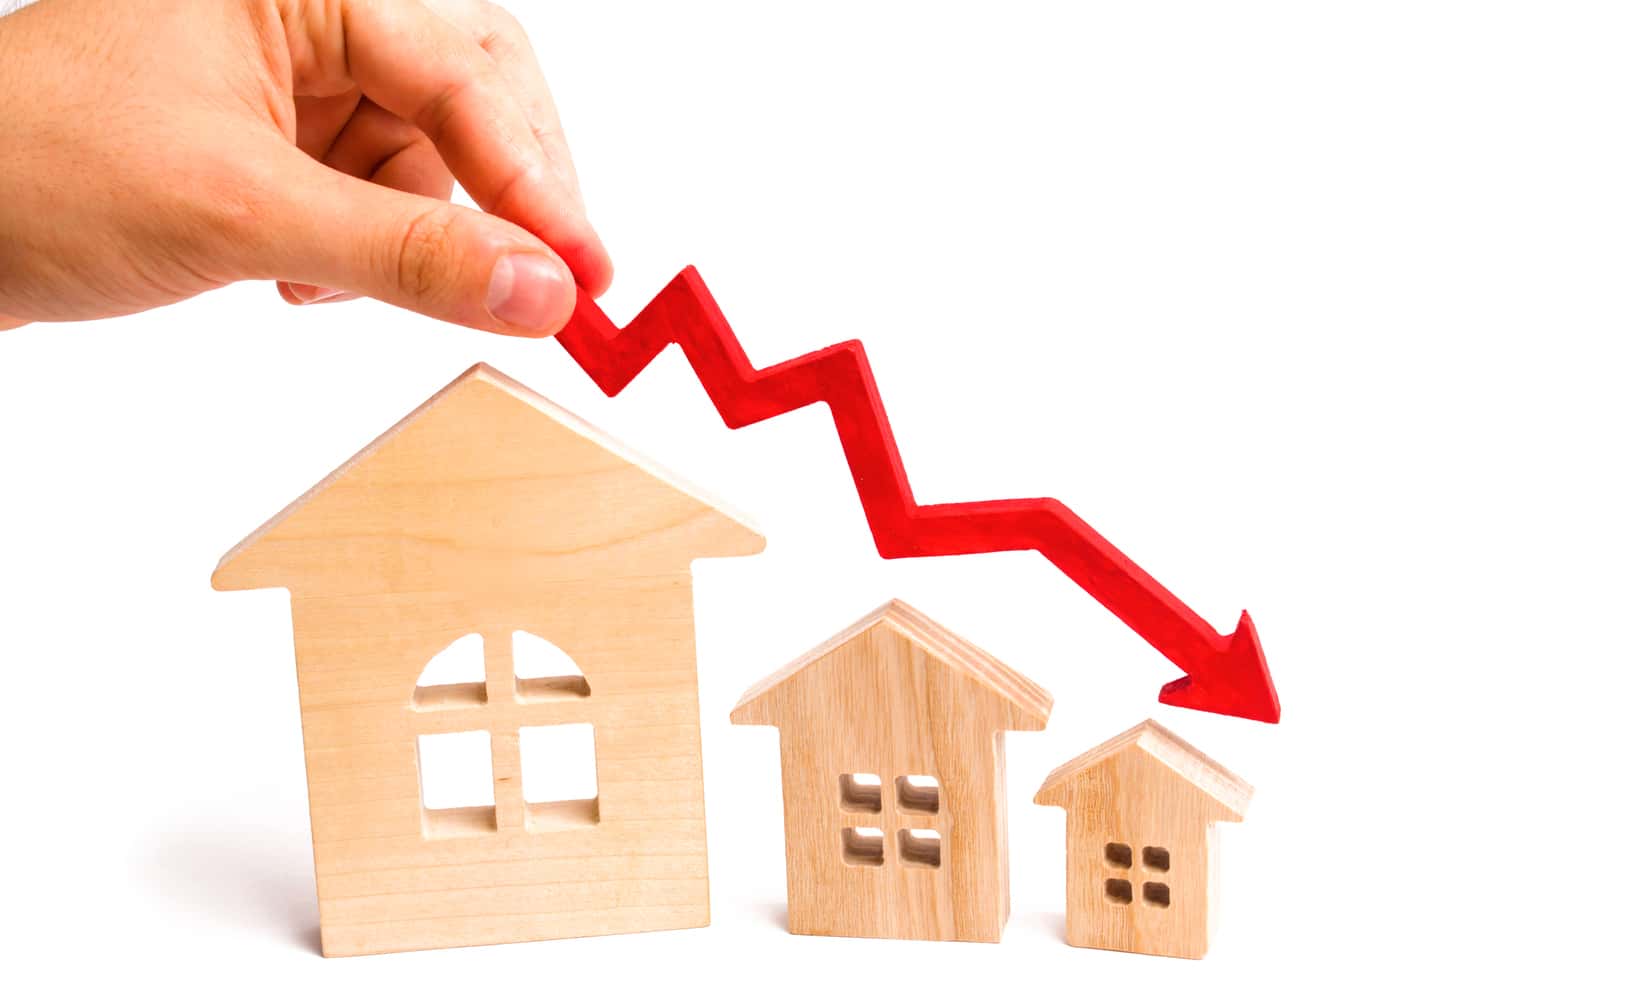 the-hand-holds-a-red-arrow-above-the-wooden-houses-down-the-houses-are-decreasing-the-concept-of-falling-demand-and-supply-in-the-real-estate-market-economic-crisis-the-fall-in-prices-3